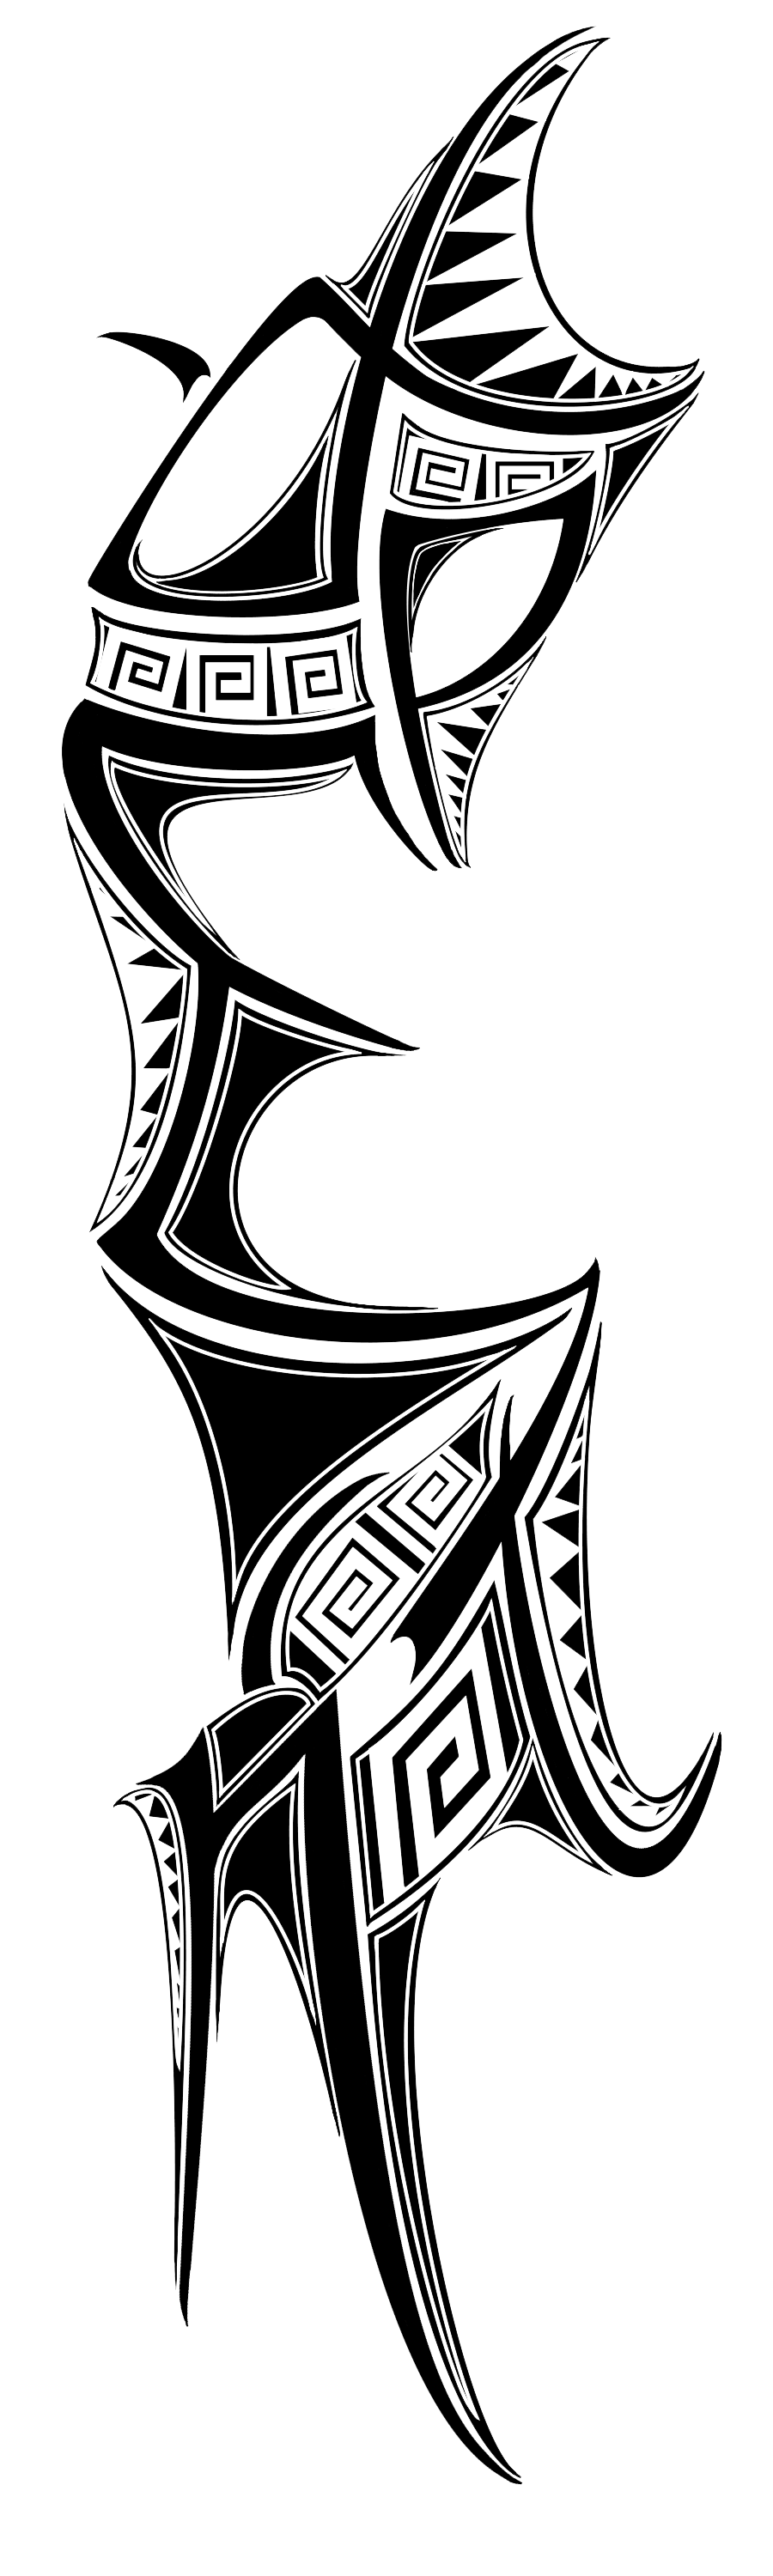 Arm Tattoo PNG Images Transparent Free Download.